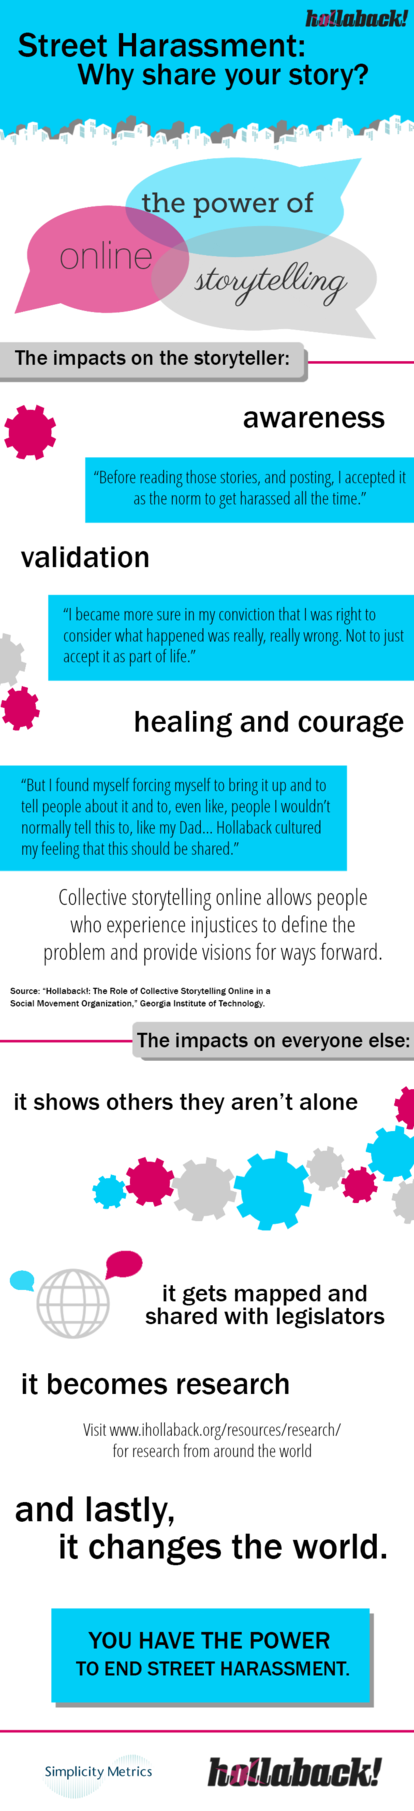 hollaback: Reasons to Share infographic